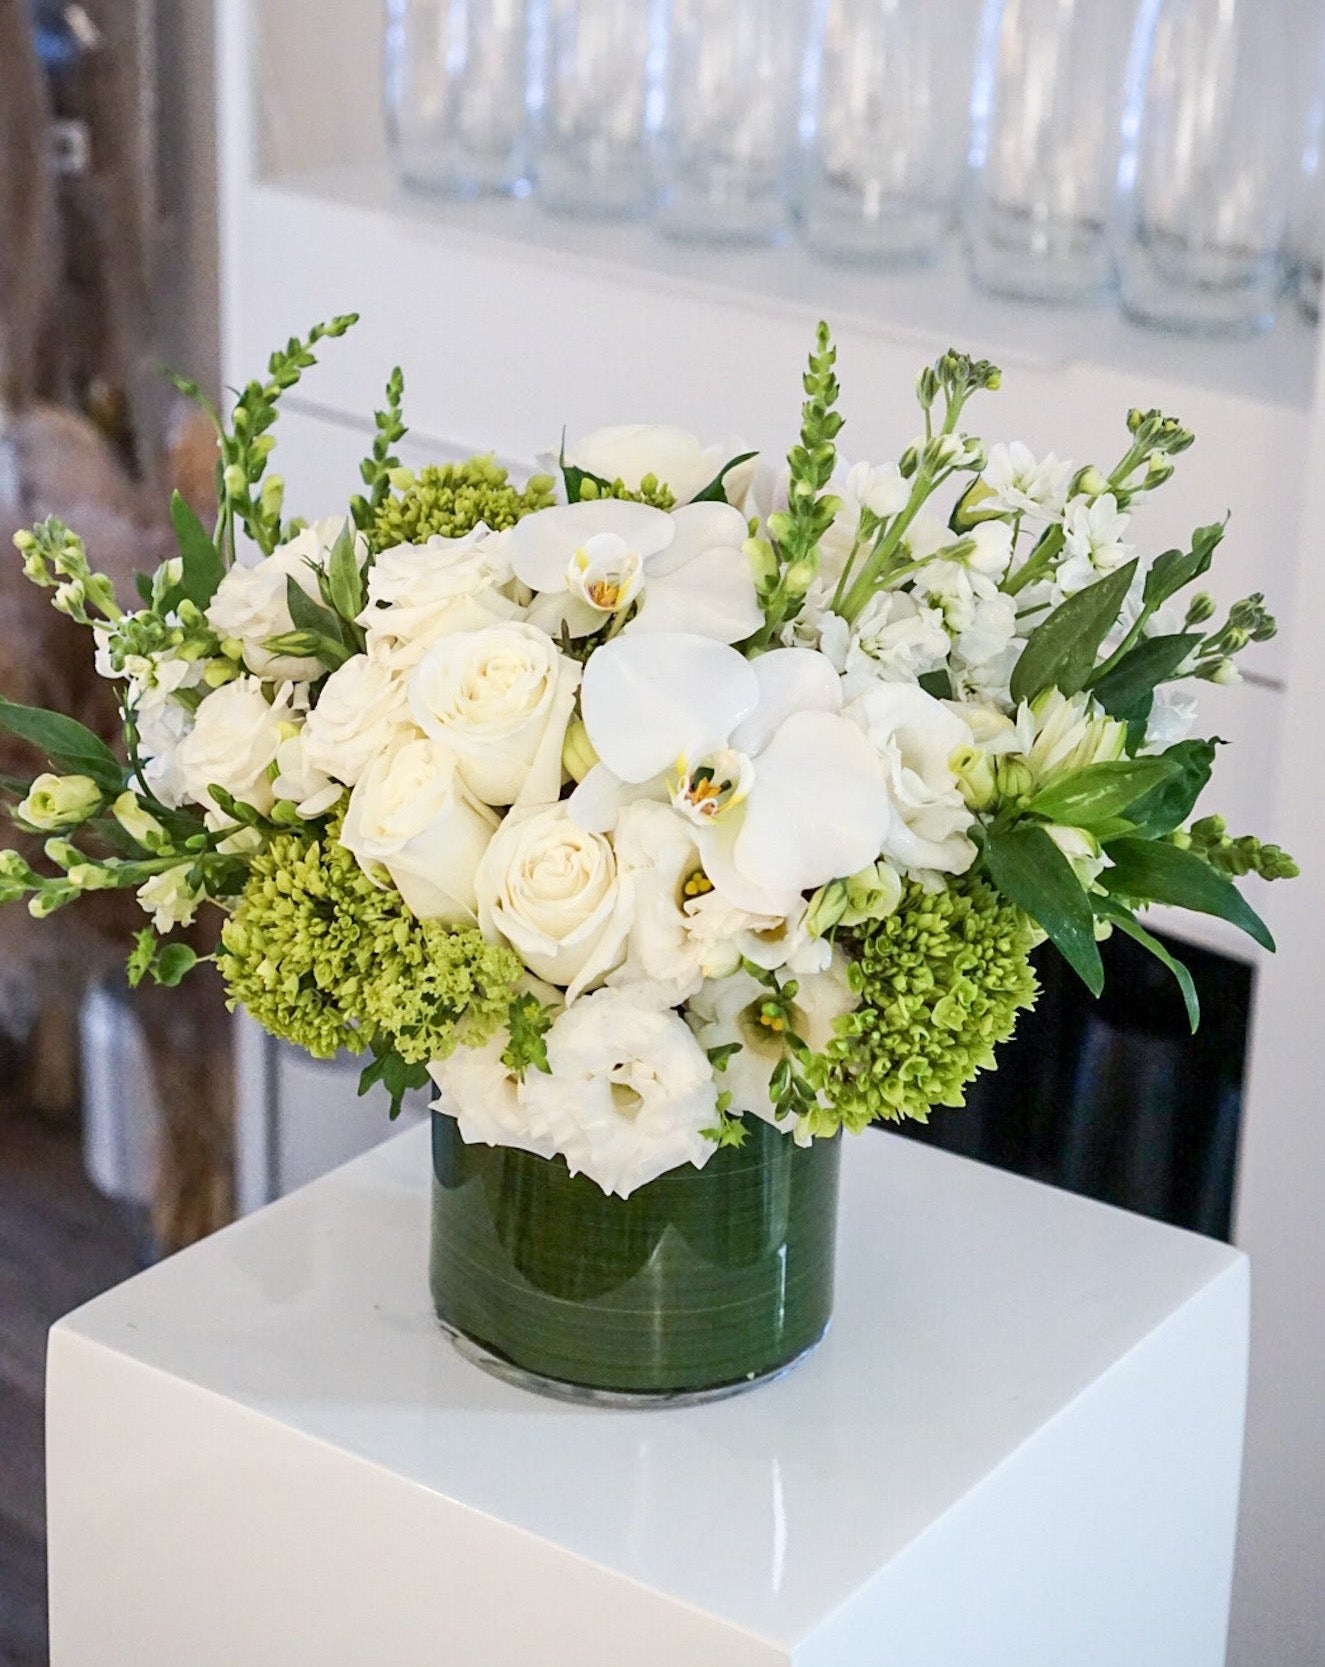 Blooms of bright white, cream and lime green. The combination is rich with texture and innocent beauty. Presented in a 6x6" cylinder glass vase that they will use later for roses, tulips, potpourri, etc. 